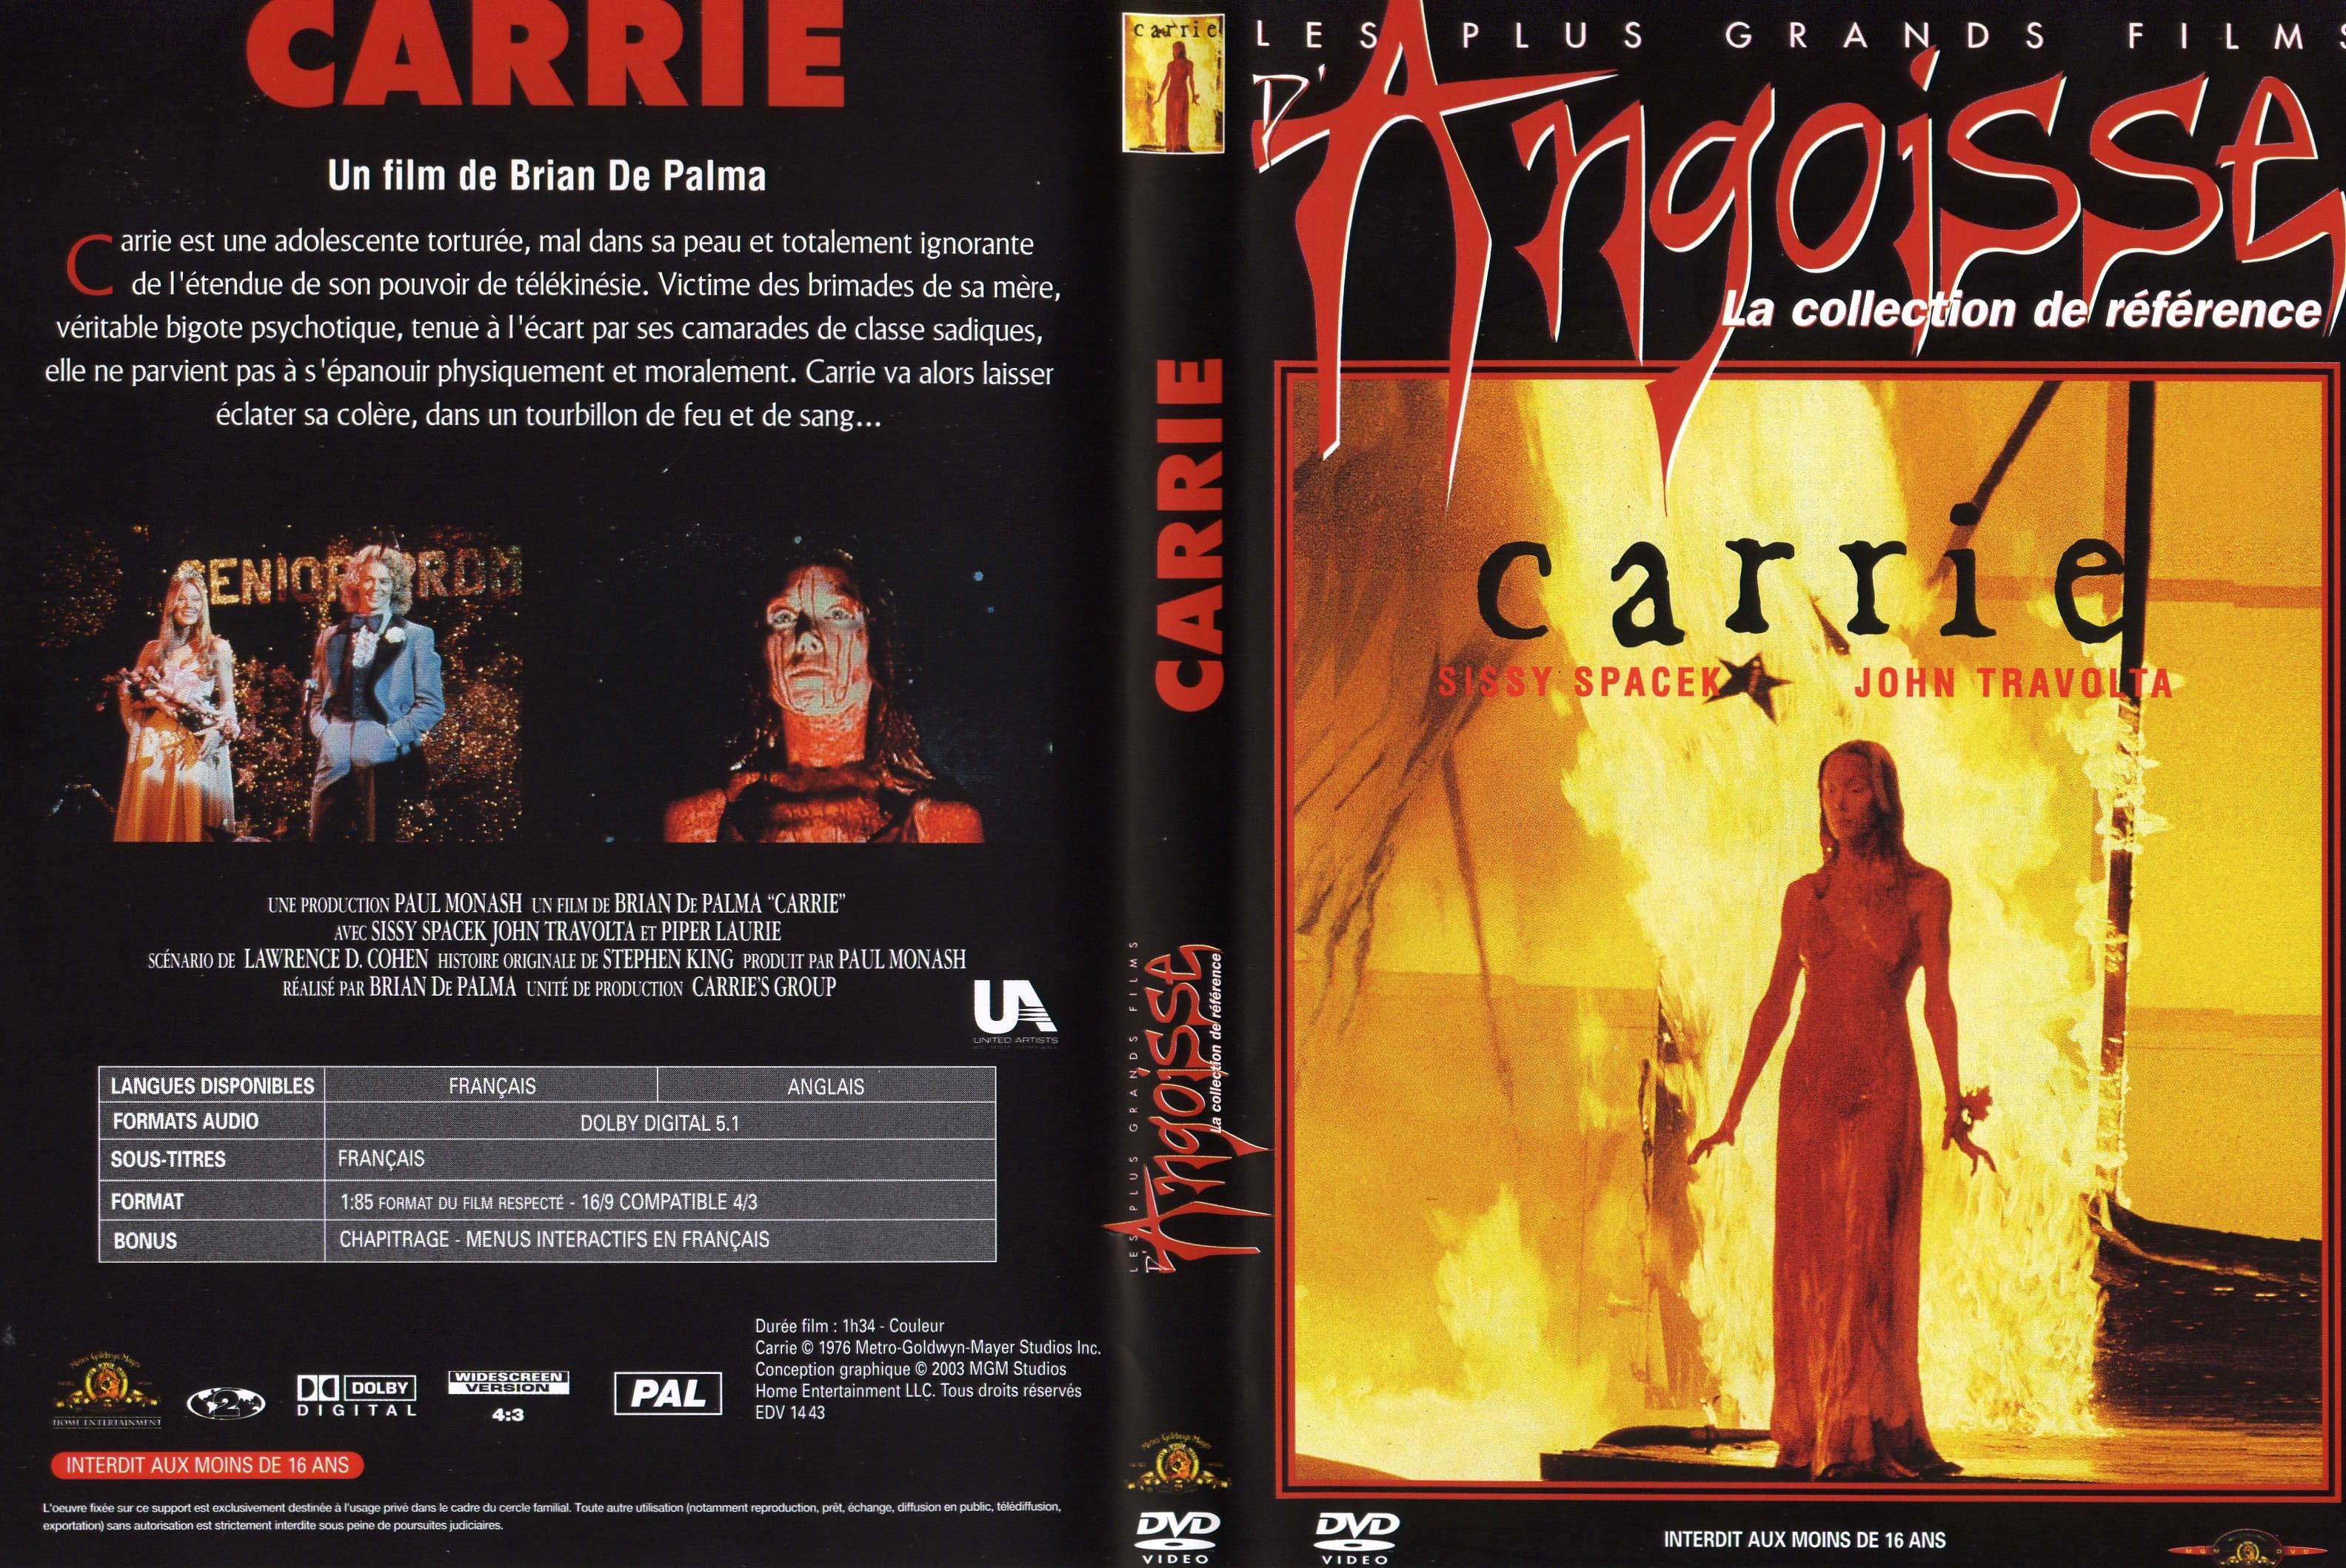 Jaquette DVD Carrie